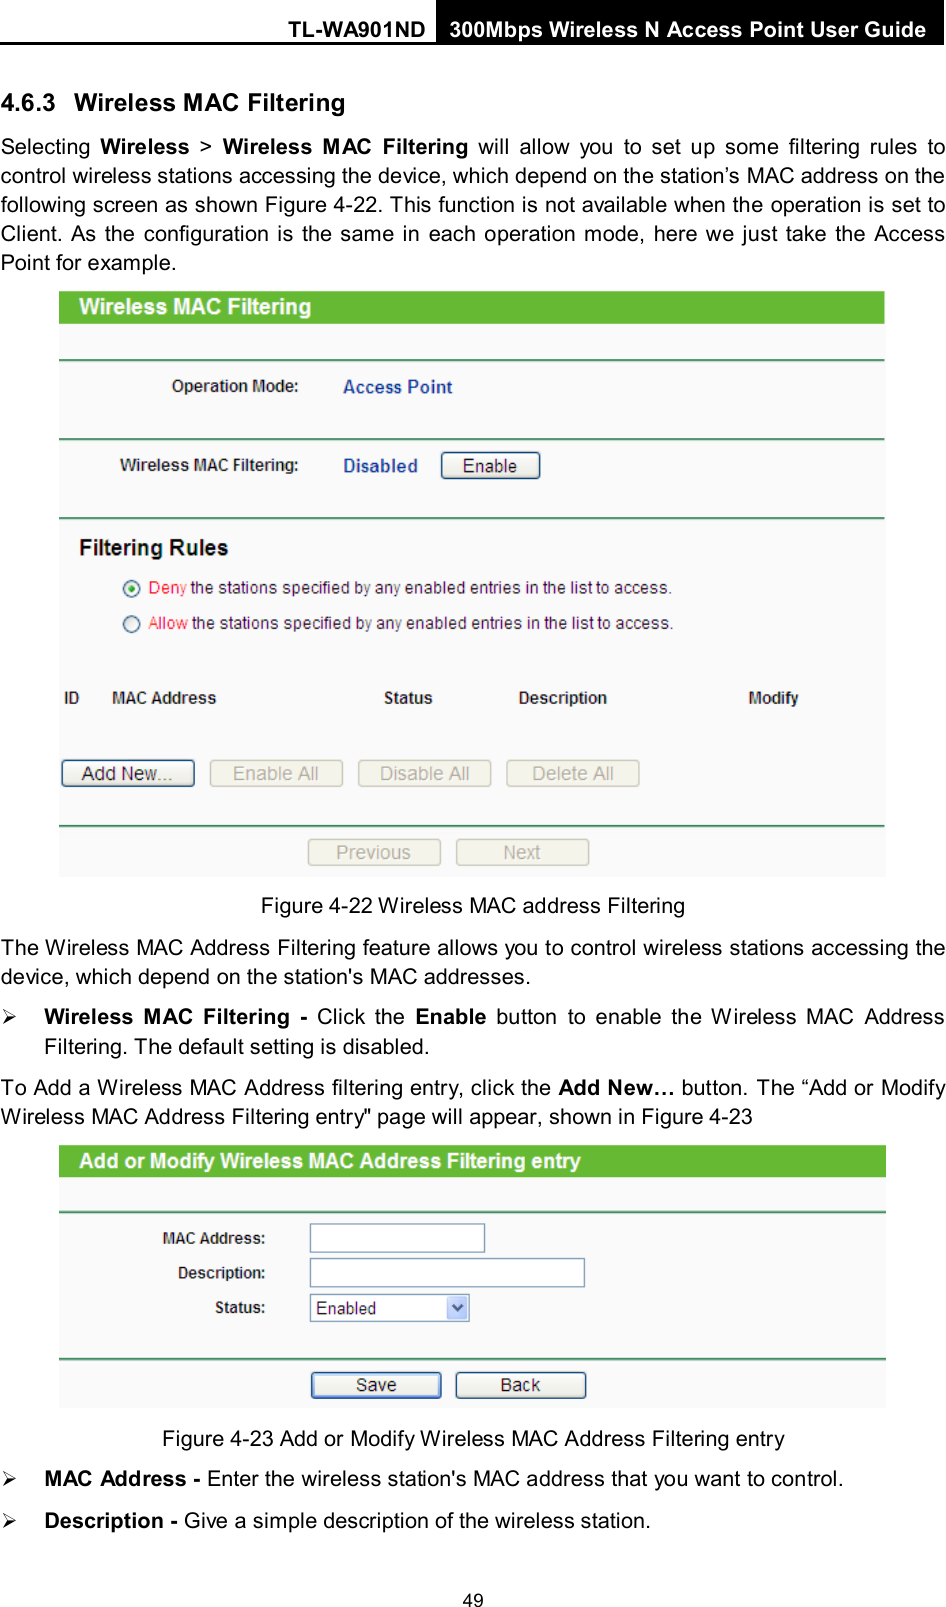 TL-WA901ND 300Mbps Wireless N Access Point User Guide  49 4.6.3 Wireless MAC Filtering Selecting  Wireless &gt;  Wireless  MAC Filtering will allow you to set up some filtering rules to control wireless stations accessing the device, which depend on the station’s MAC address on the following screen as shown Figure 4-22. This function is not available when the operation is set to Client.  As the configuration is the same in each operation mode, here we just take the Access Point for example.  Figure 4-22 Wireless MAC address Filtering The Wireless MAC Address Filtering feature allows you to control wireless stations accessing the device, which depend on the station&apos;s MAC addresses.  Wireless MAC Filtering - Click the Enable button to enable the Wireless MAC Address Filtering. The default setting is disabled. To Add a Wireless MAC Address filtering entry, click the Add New… button. The “Add or Modify Wireless MAC Address Filtering entry&quot; page will appear, shown in Figure 4-23  Figure 4-23 Add or Modify Wireless MAC Address Filtering entry  MAC  Add ress - Enter the wireless station&apos;s MAC address that you want to control.    Description - Give a simple description of the wireless station.   